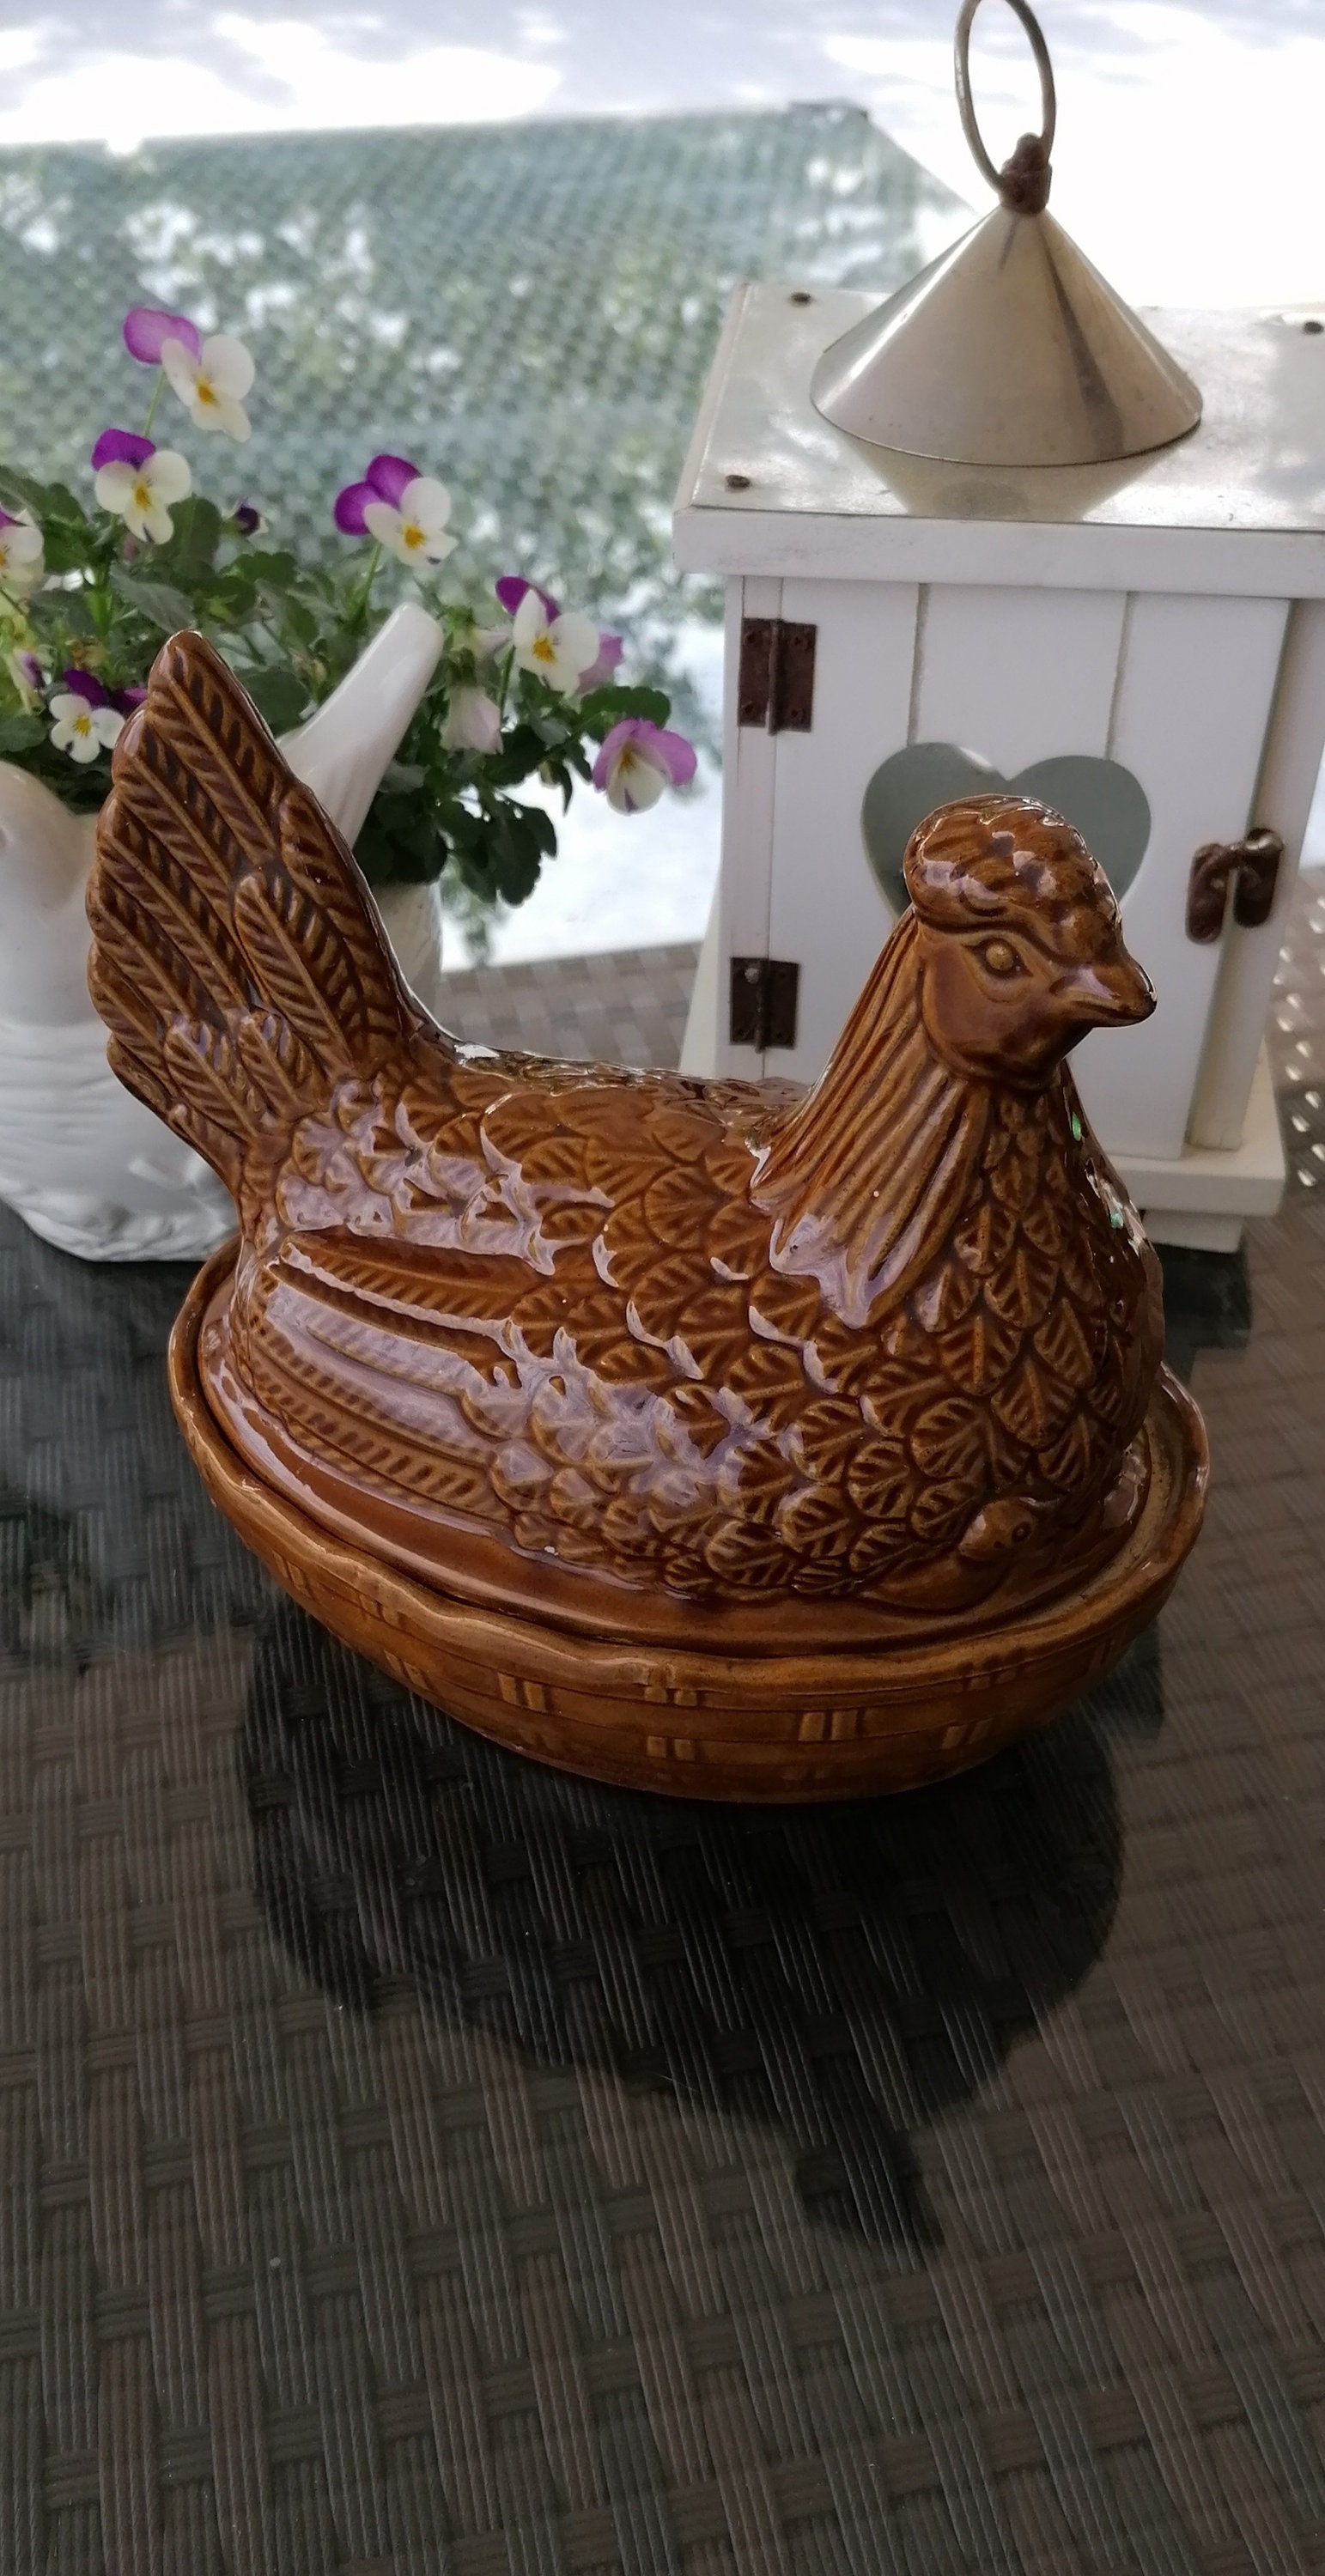 Hand Painted Colorful Ceramic Chicken Egg Holder 